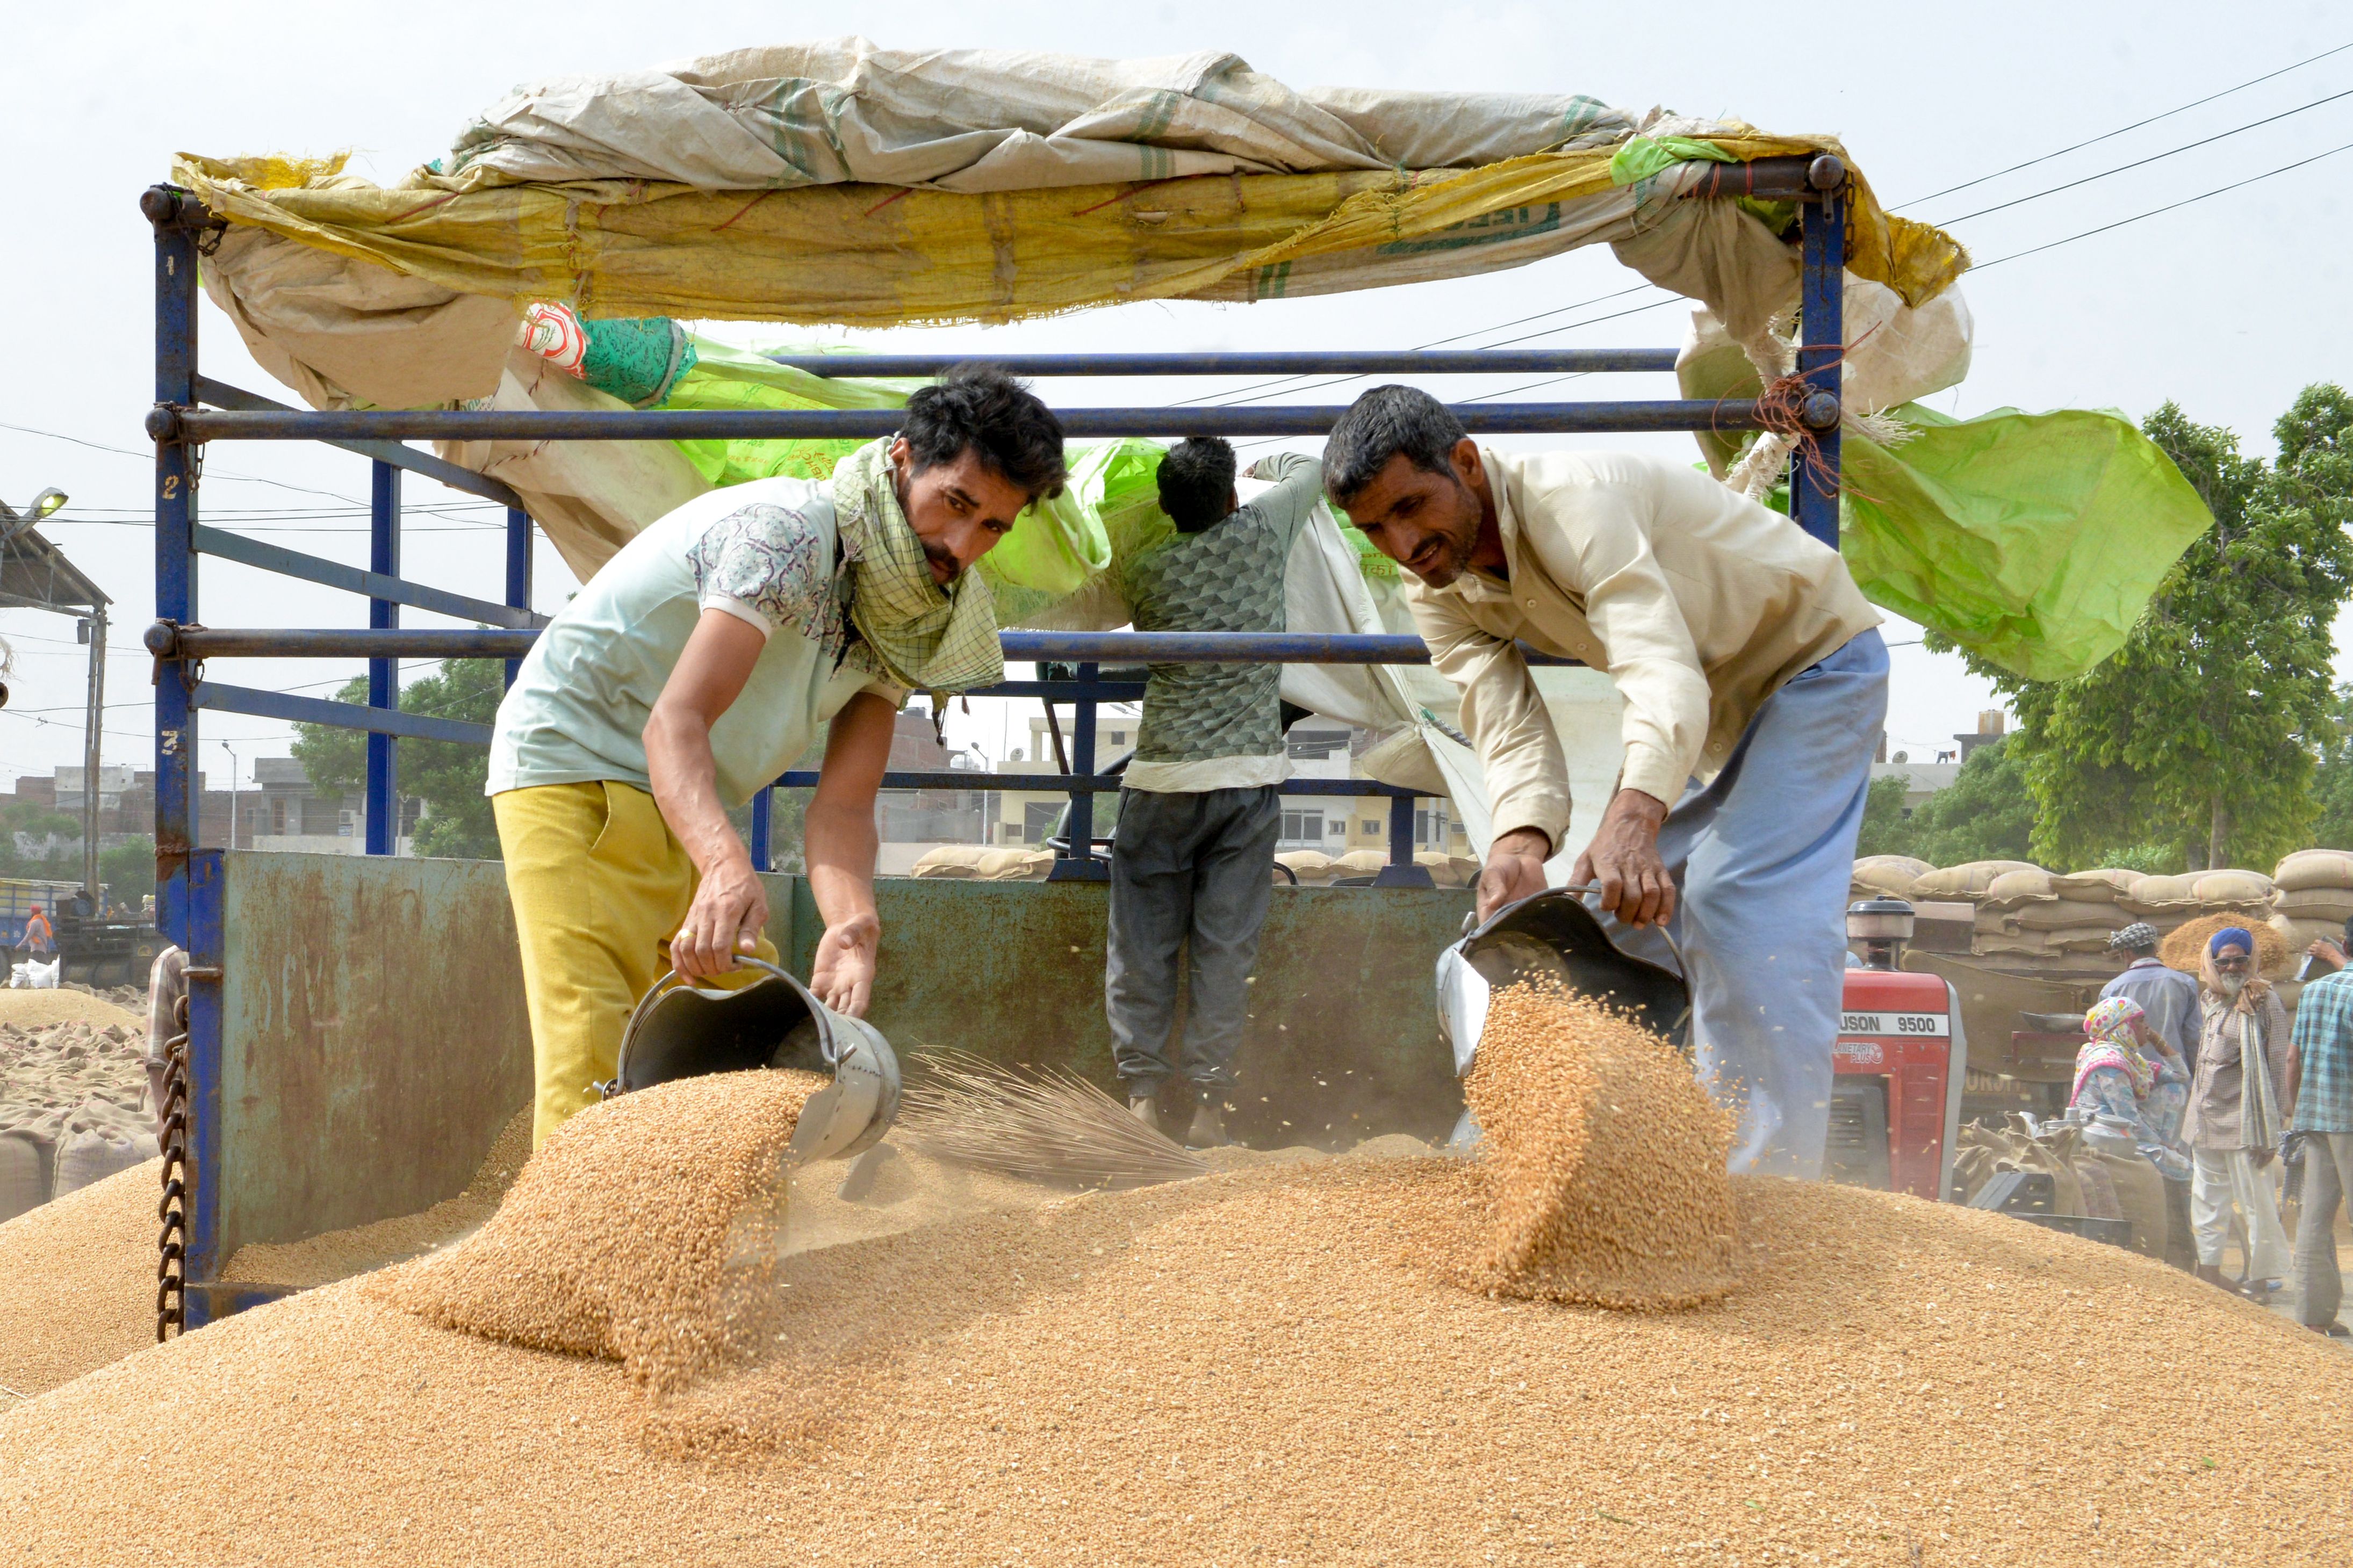 Indian labourers unload wheat grain from a trailer at a local distribution point on the outskirts of Amritsar on the eve of International Labour Day.